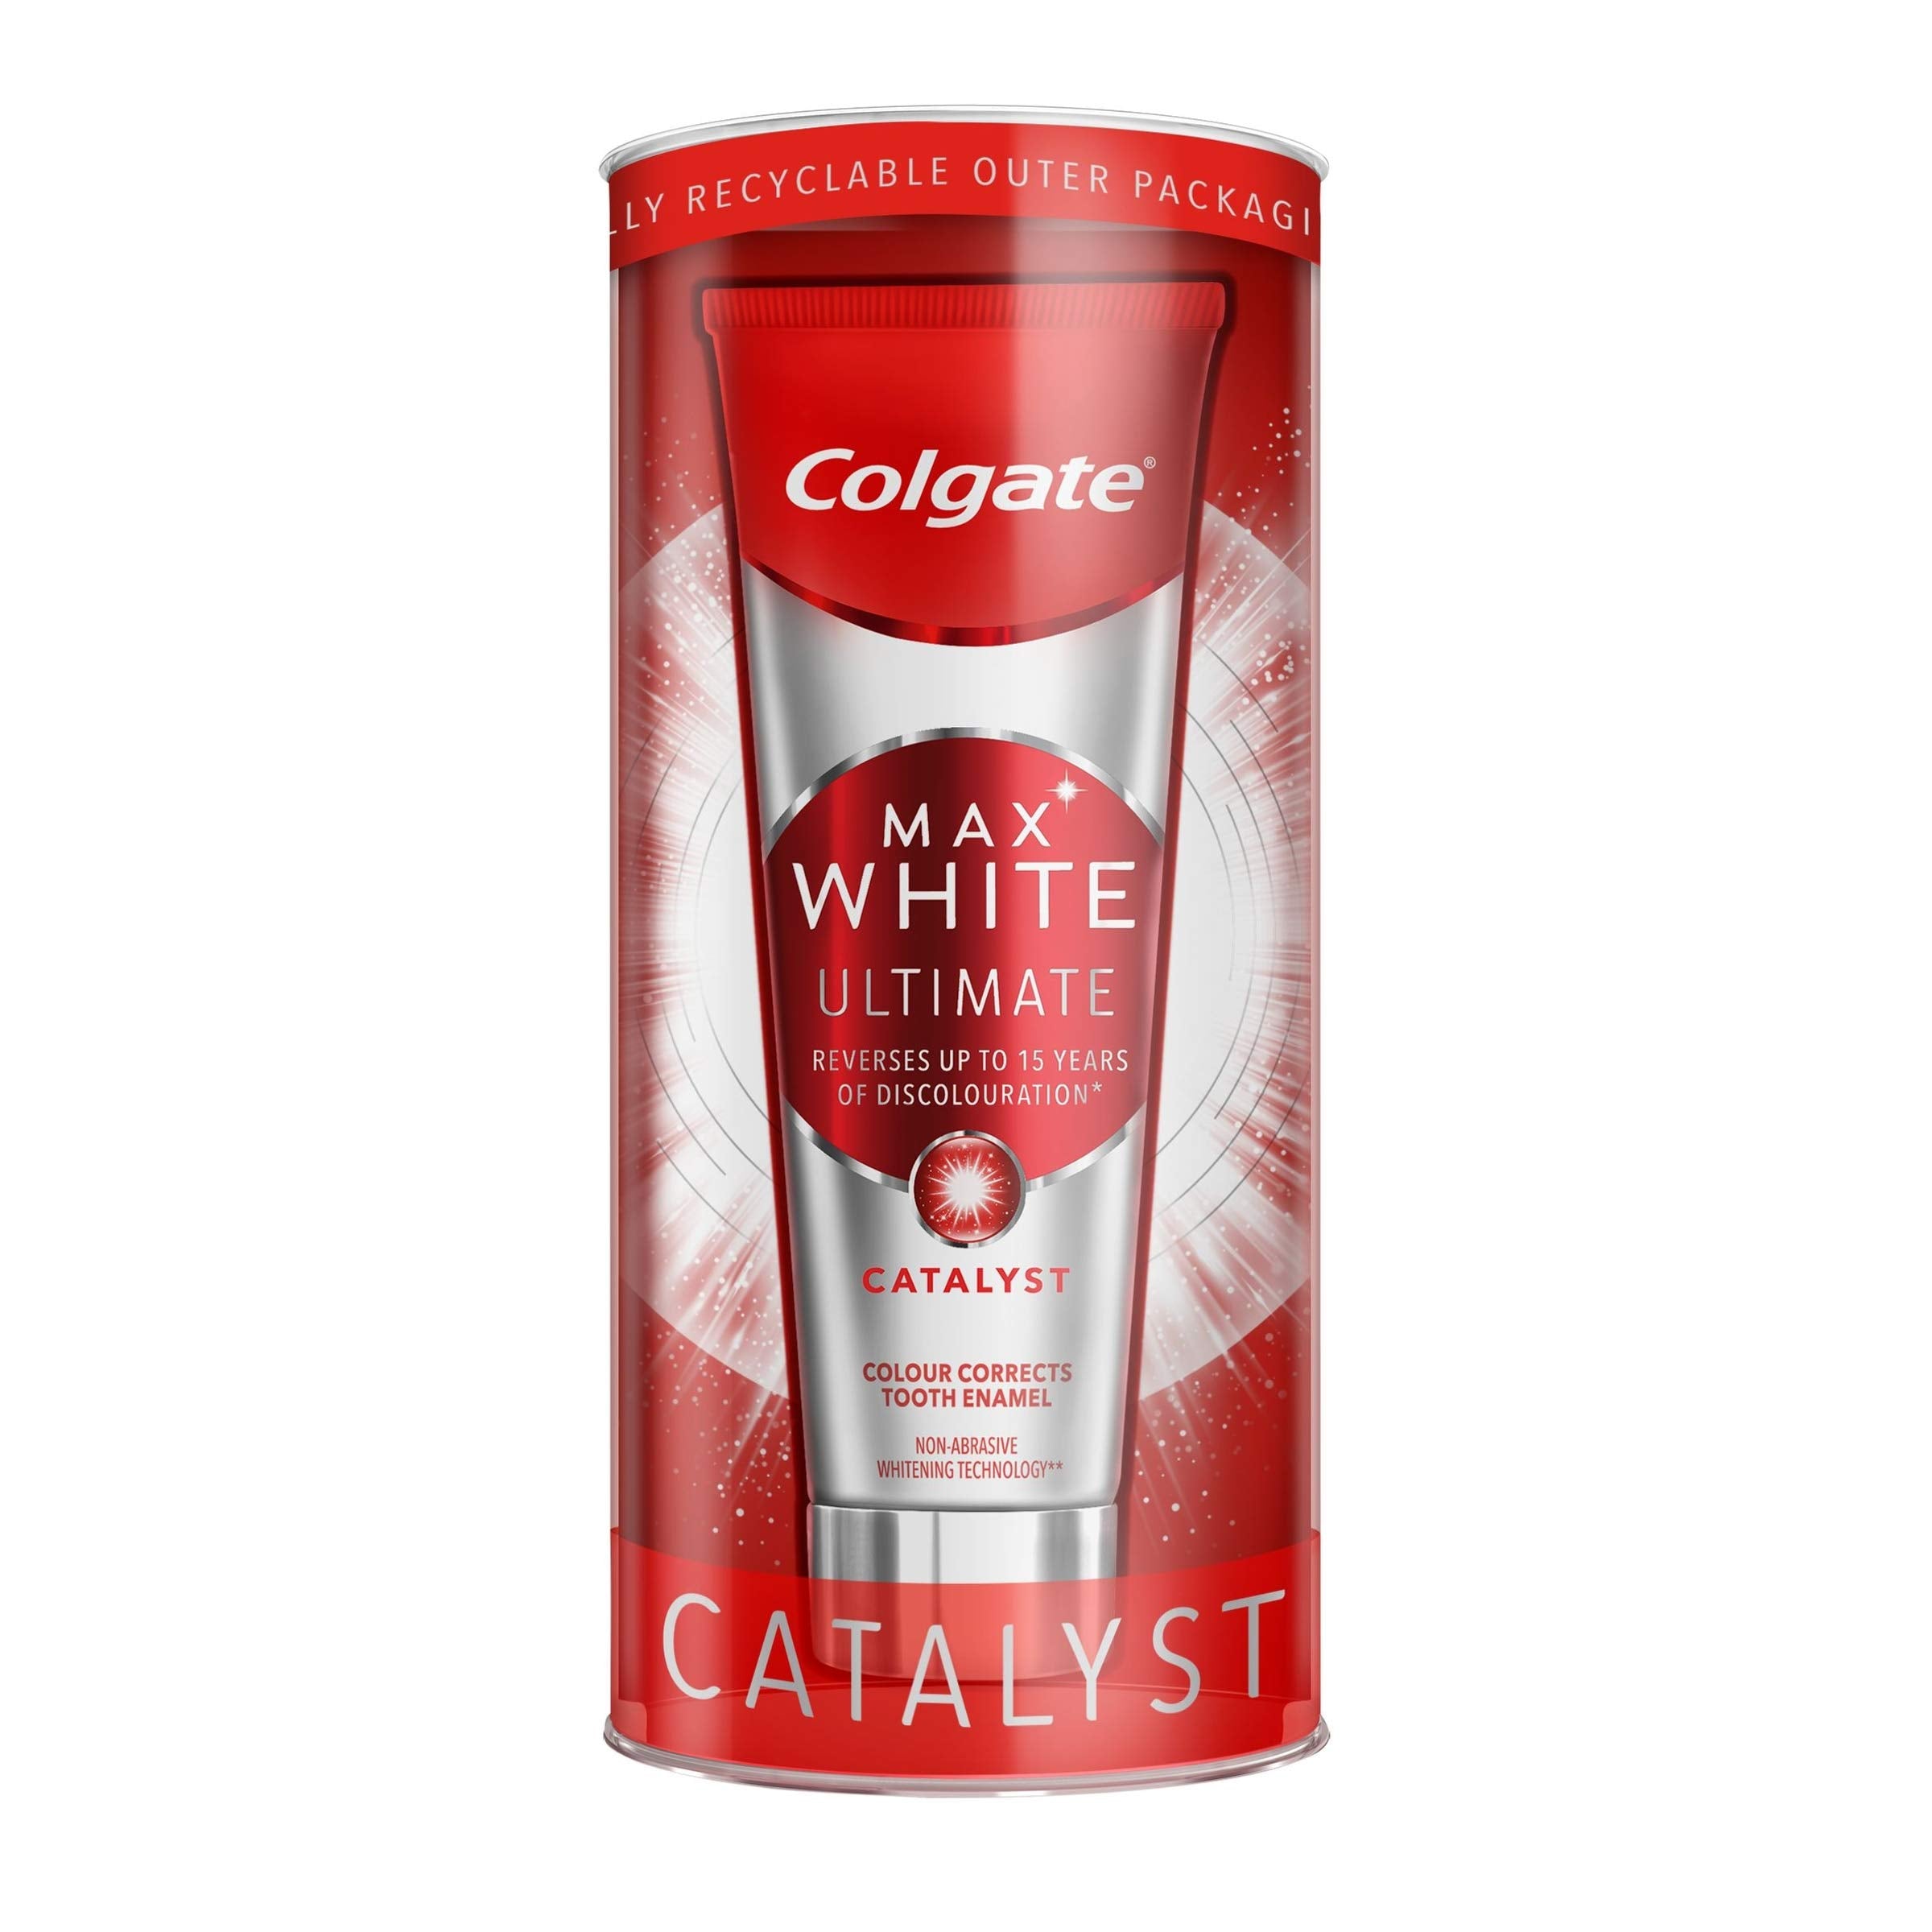 Colgate Max White Ultimate Catalyst Toothpaste, 75ml